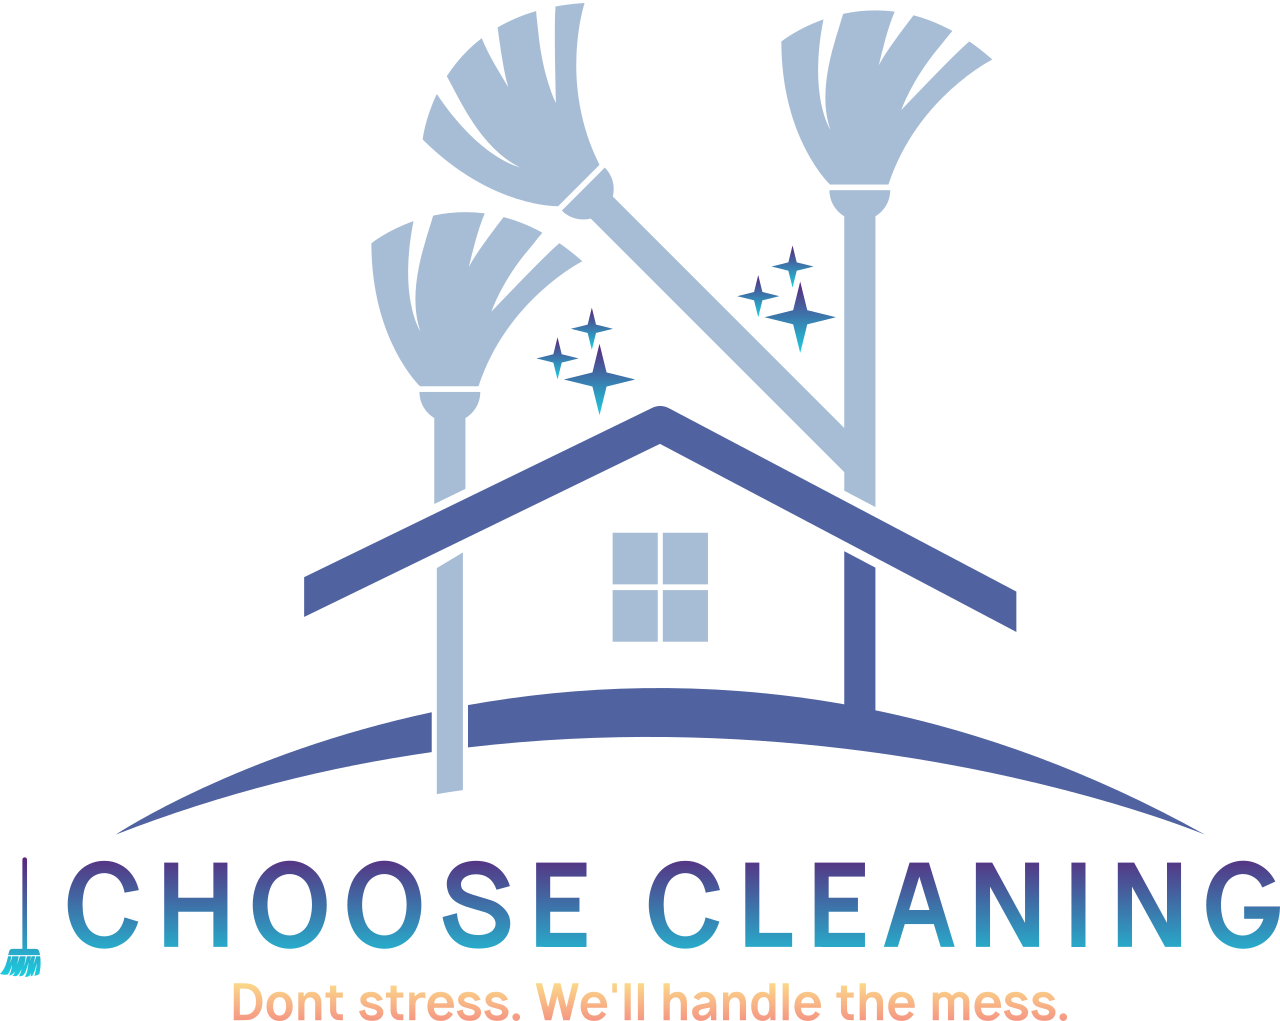 Choose Cleaning 's logo